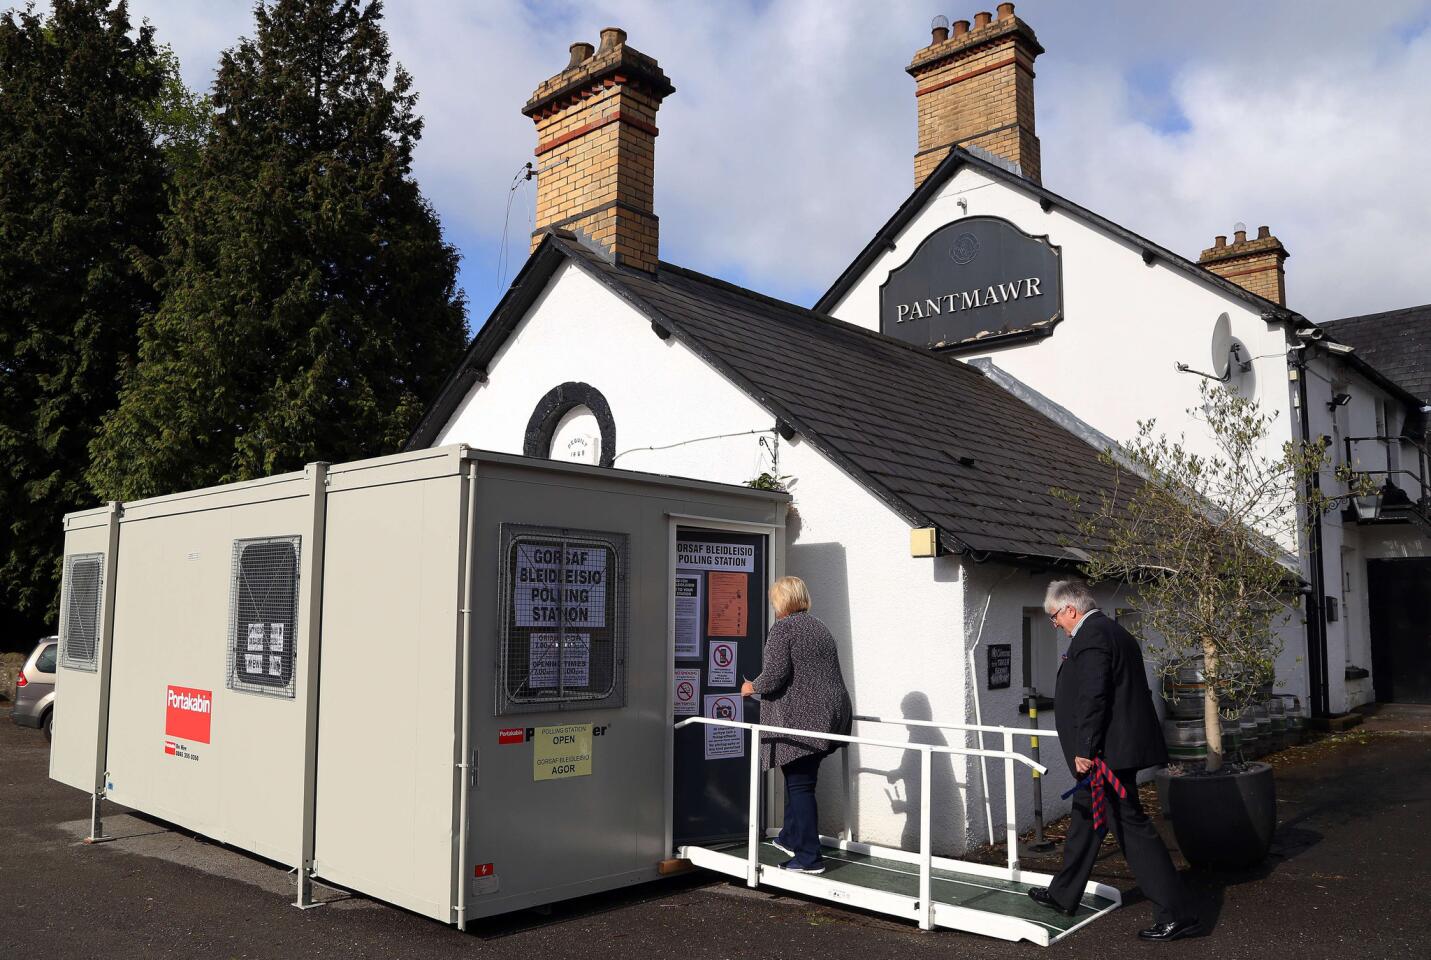 Voters arrive at a portacabin set up as a polling station near the Pantmawr Inn pub in Cardiff, South Wales.